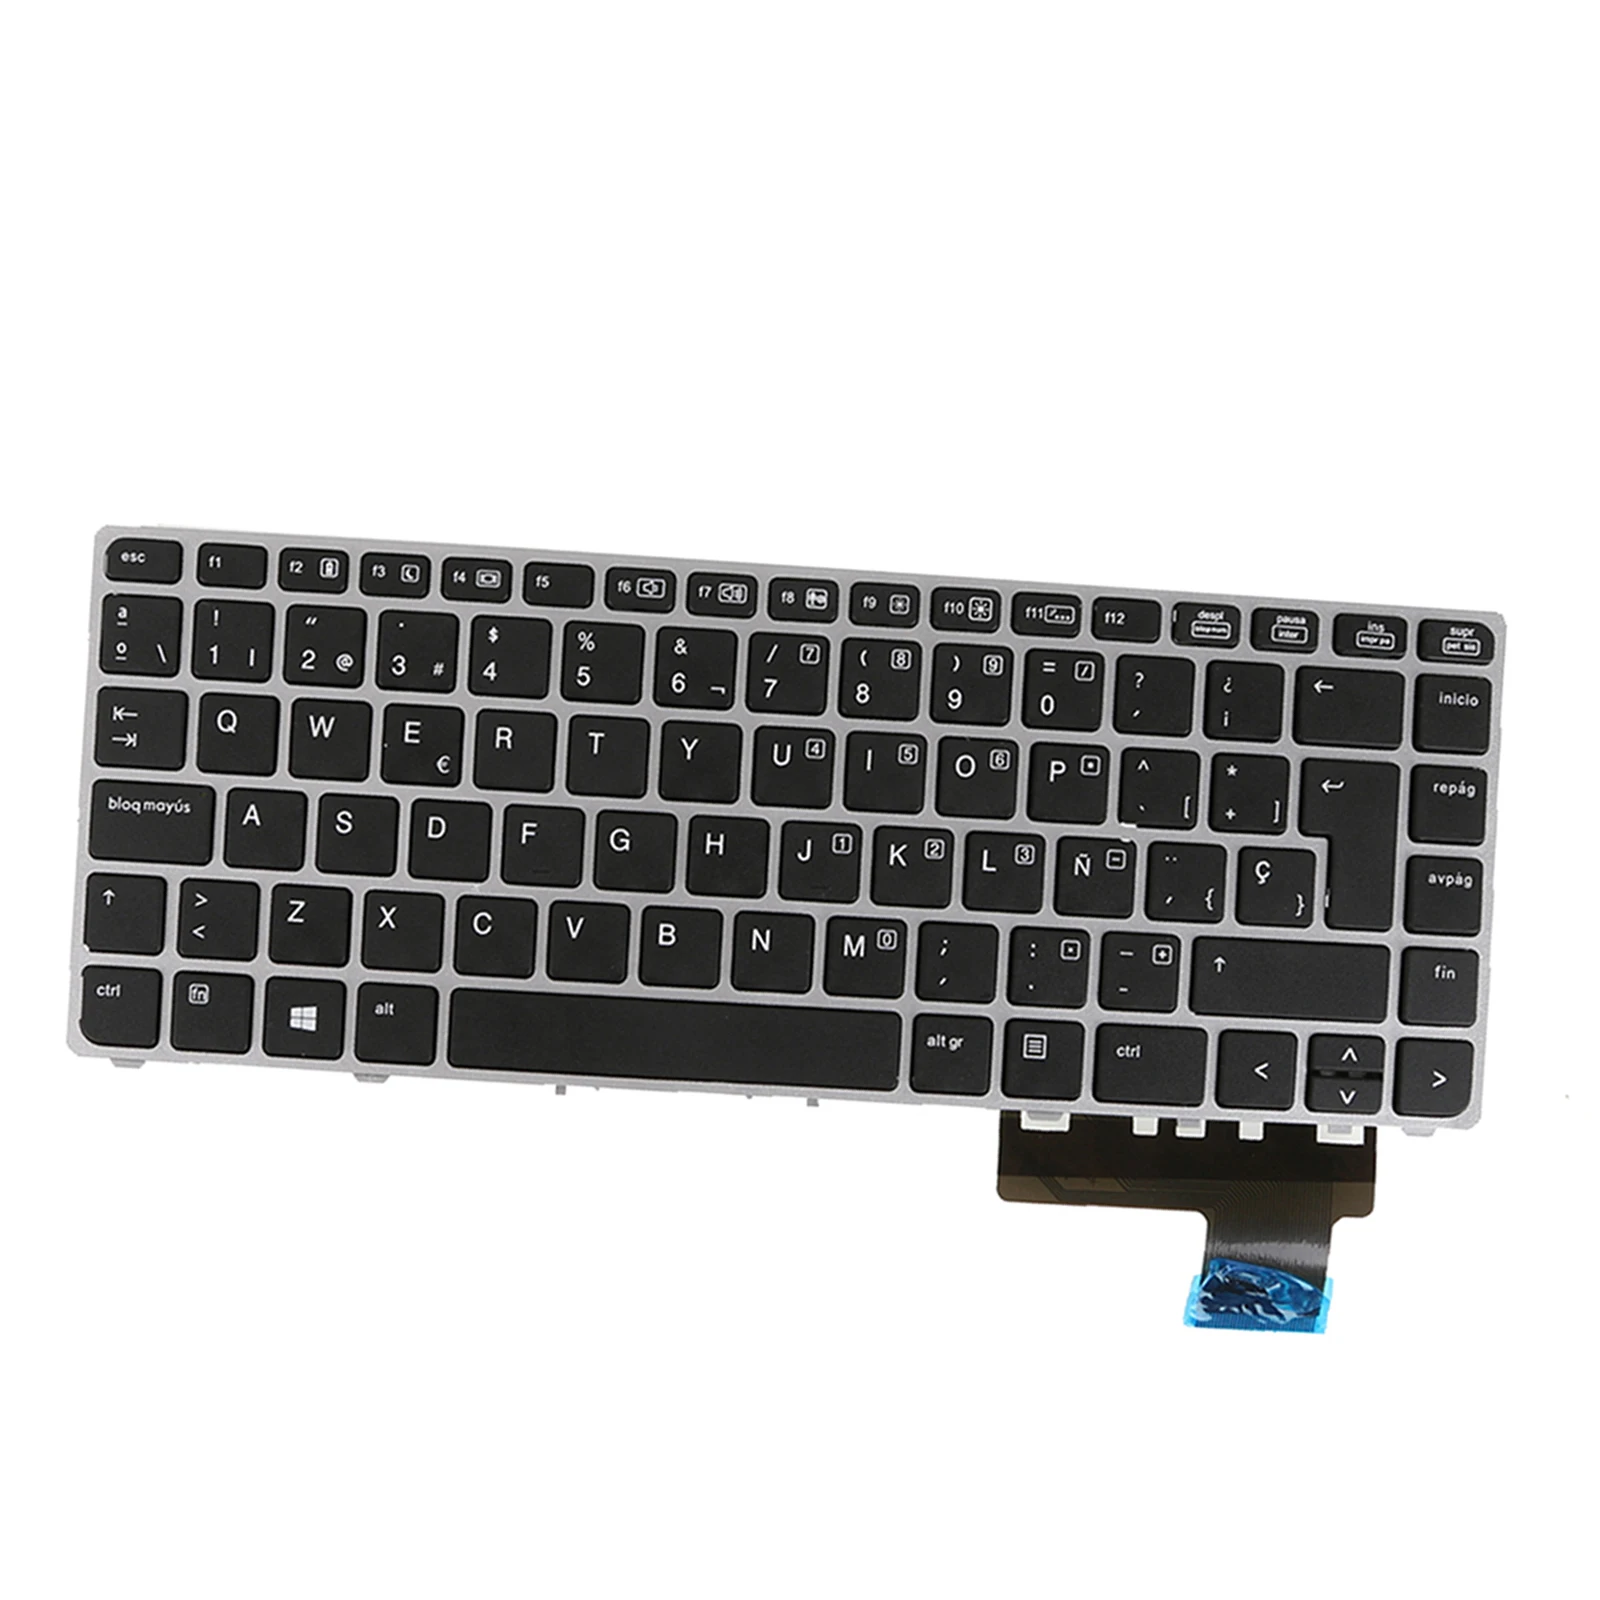 Keyboard Replaces for HP EliteBook Folio 9470M 9480M 702843-001, Professional Accessories